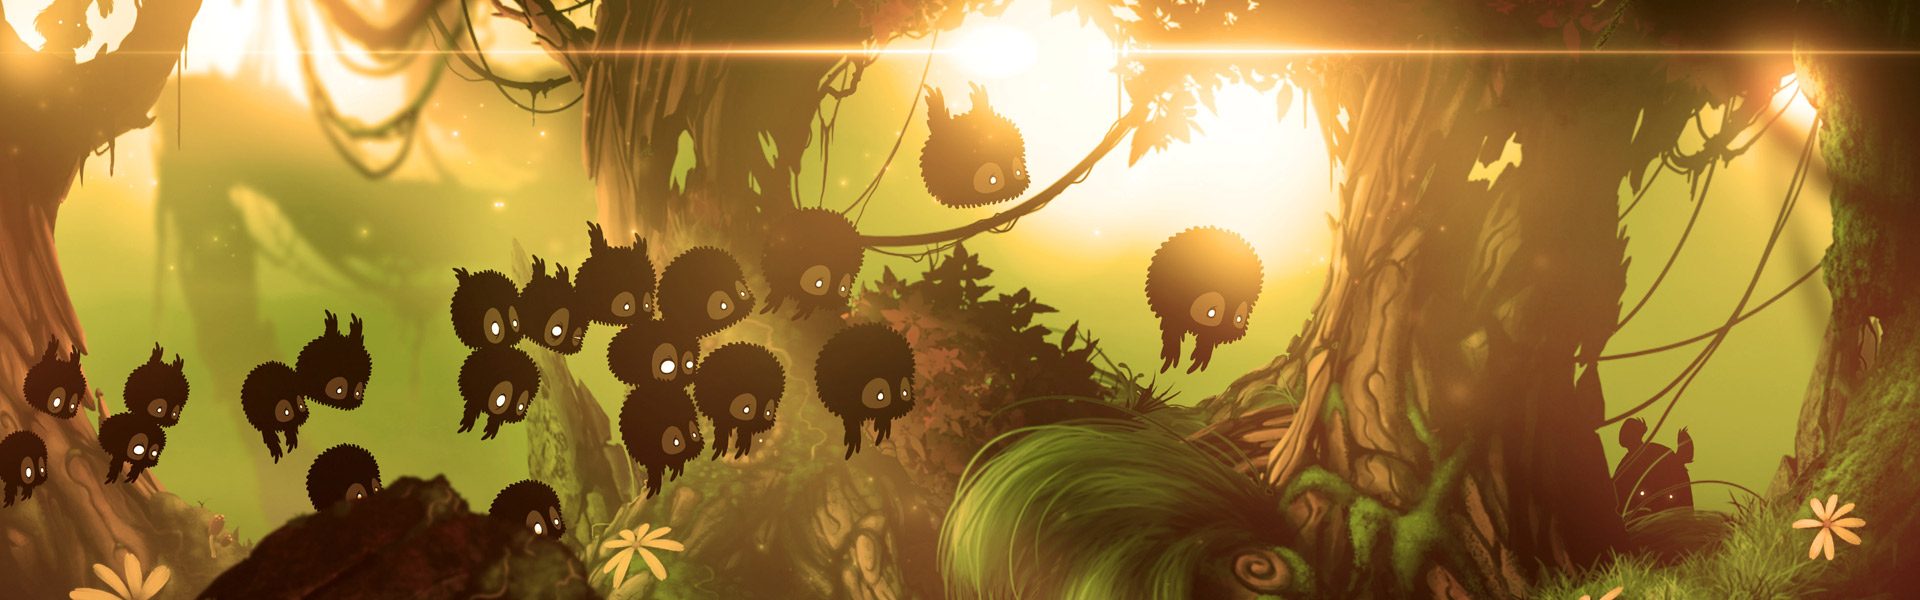 badland game of the year edition length